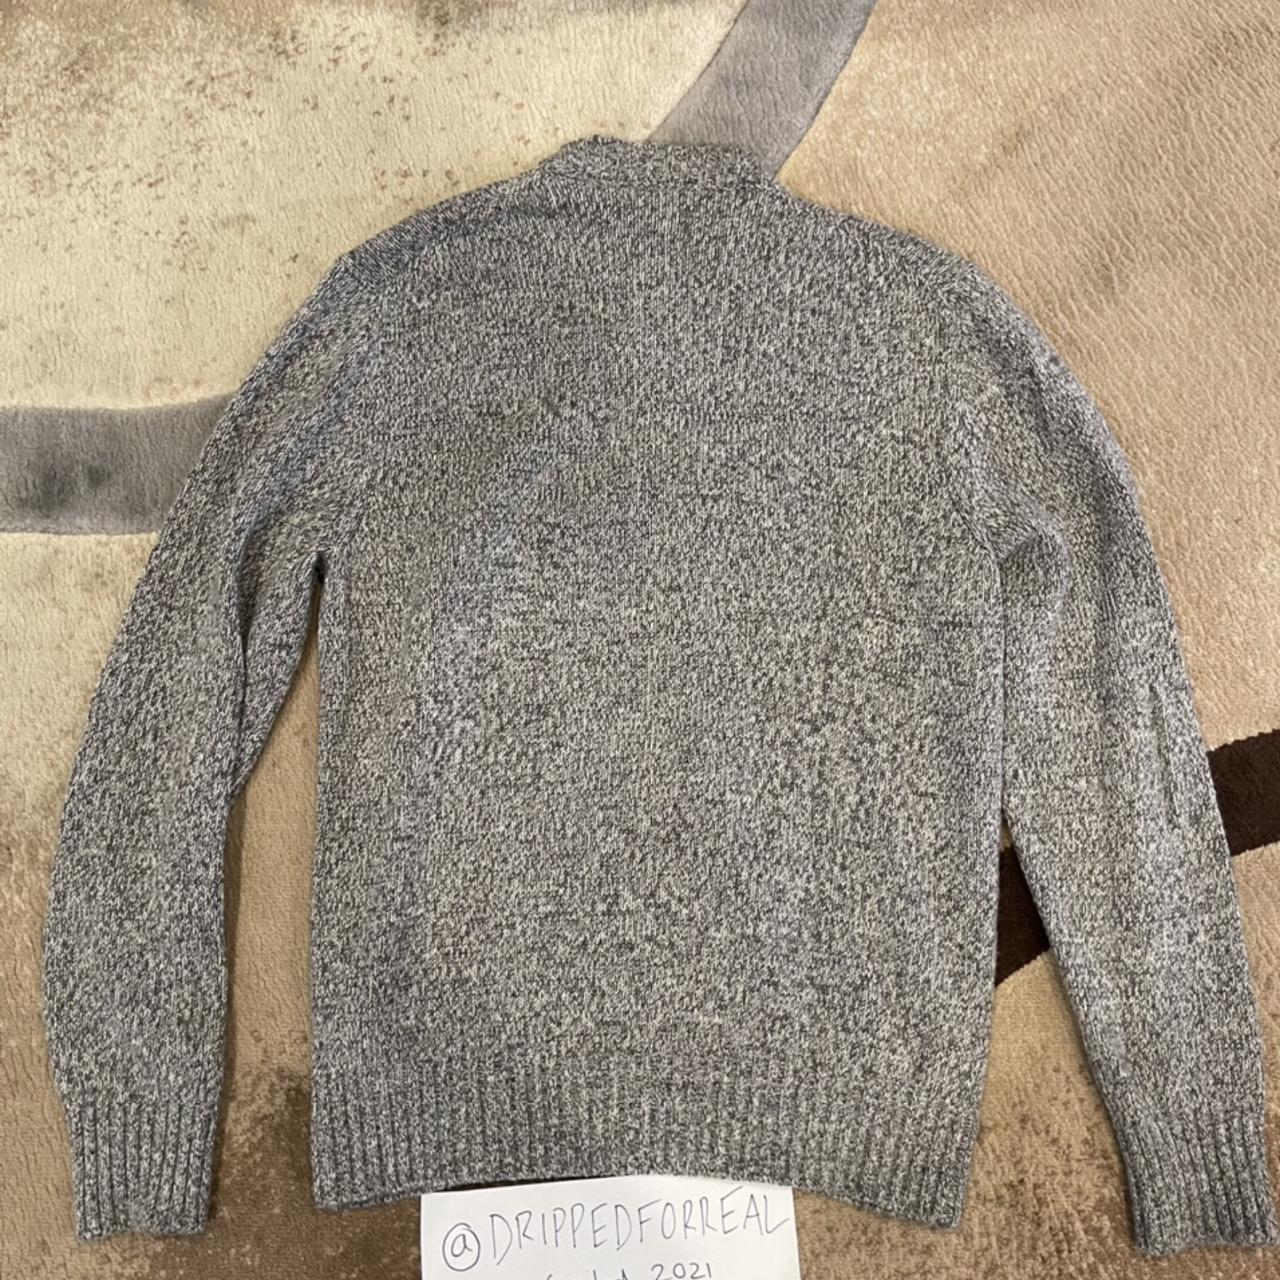 Louis vuitton merci knit sweater sz M, Worn once for